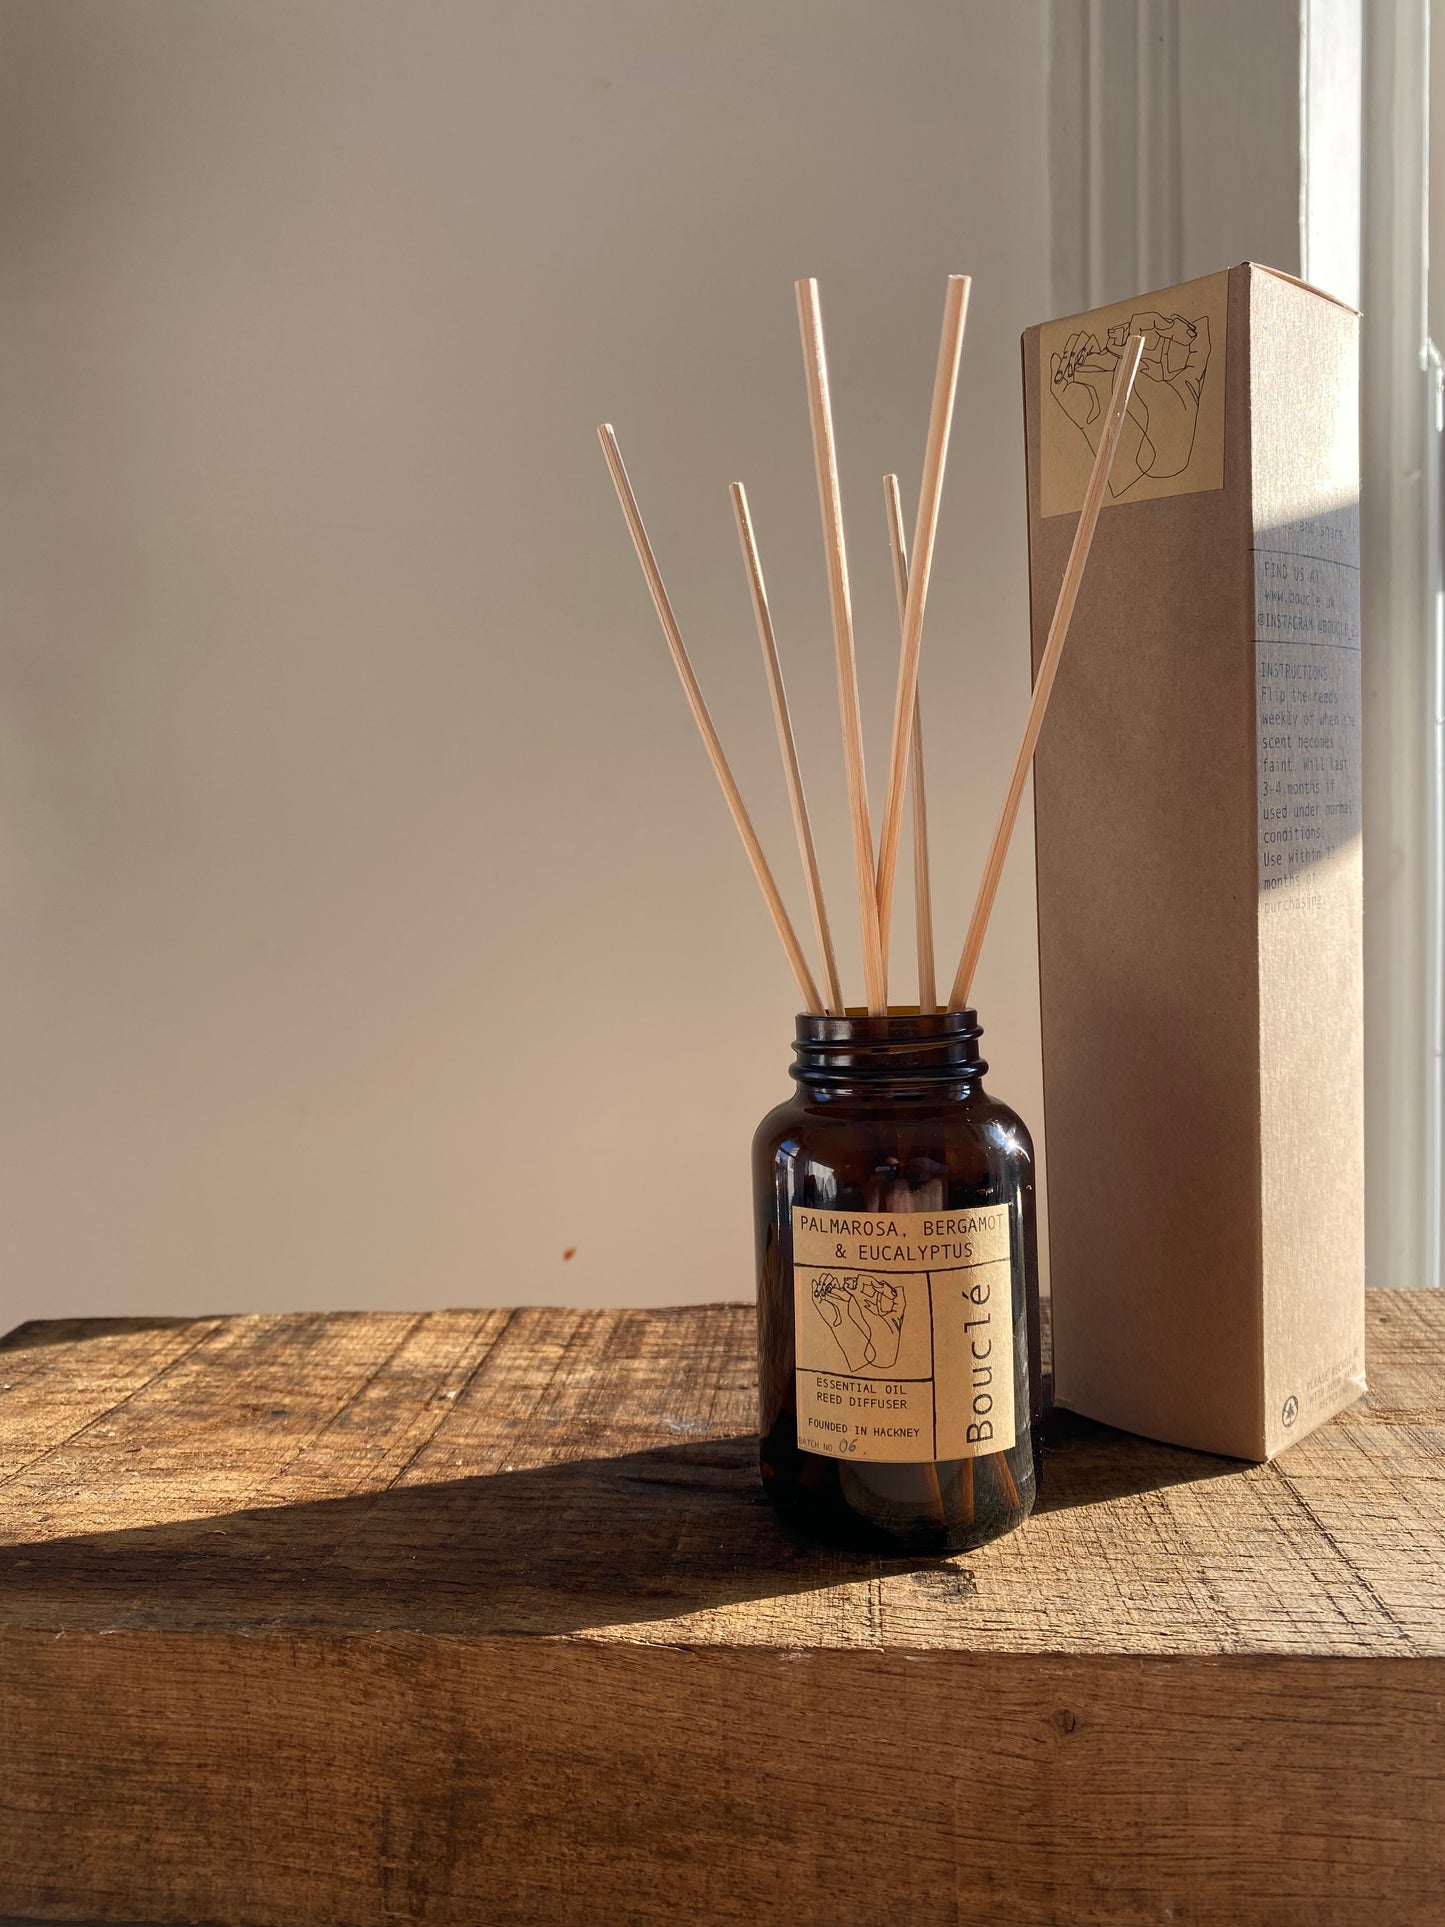 Bouclé London reed diffuser in amber glass jar for all natural flame free fragrance. Diffuser sticks in the sun.